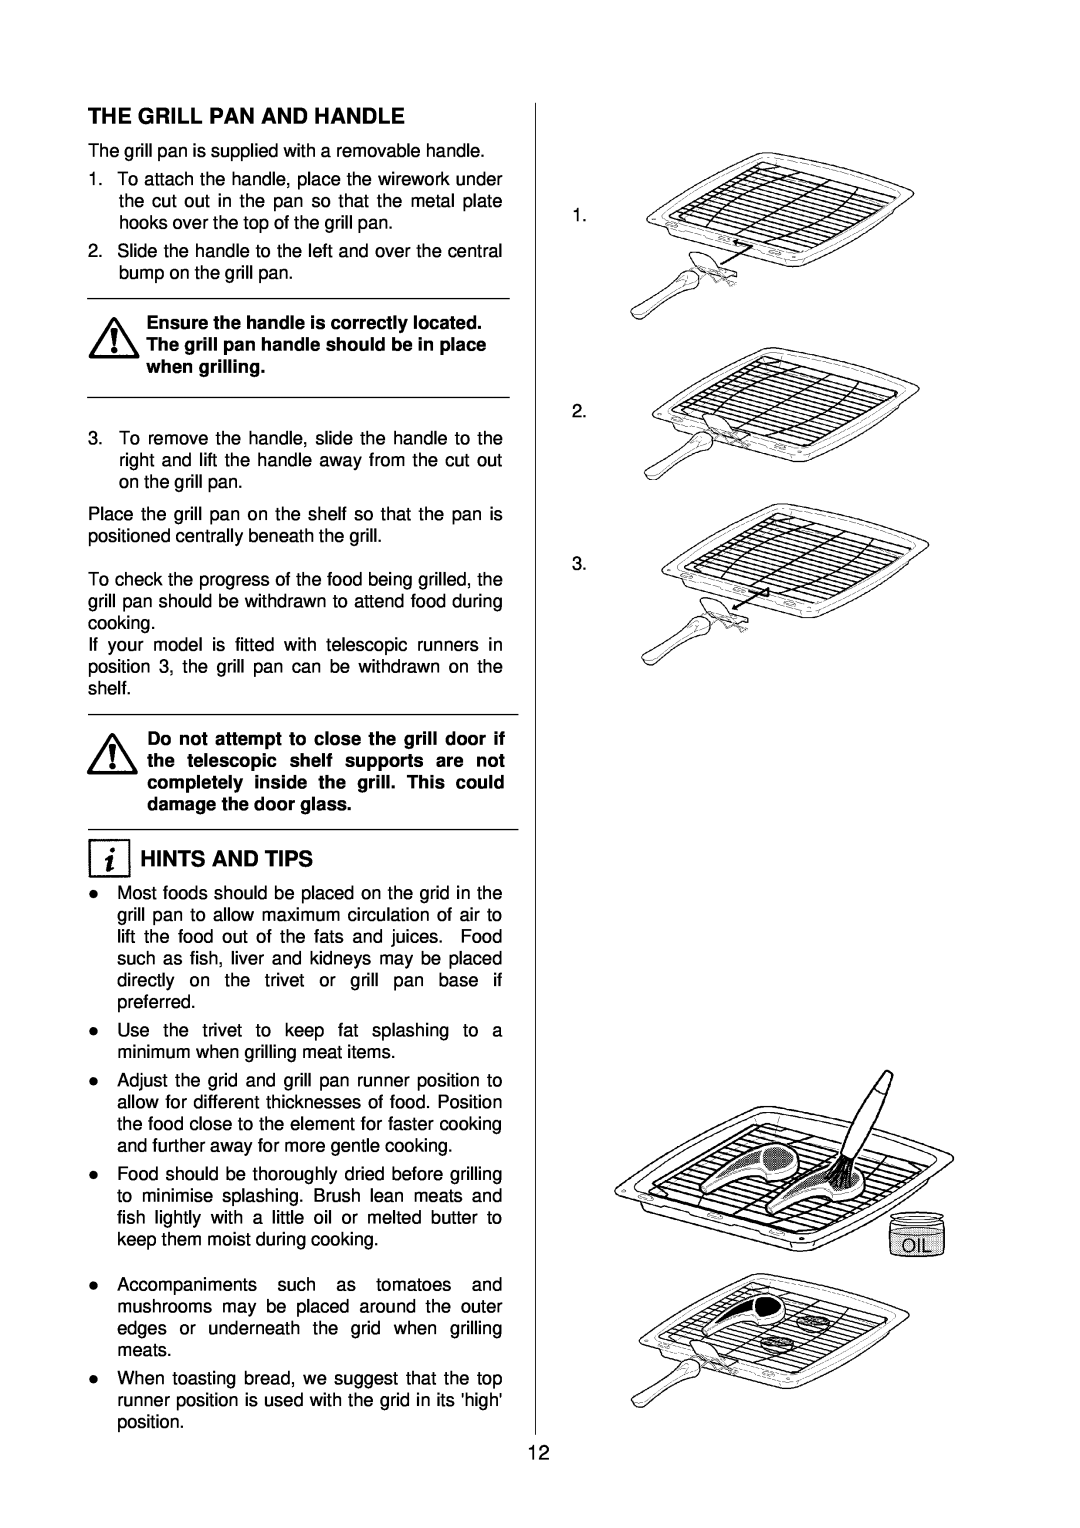 AEG D4100-1 manual The Grill Pan And Handle, Hints And Tips 